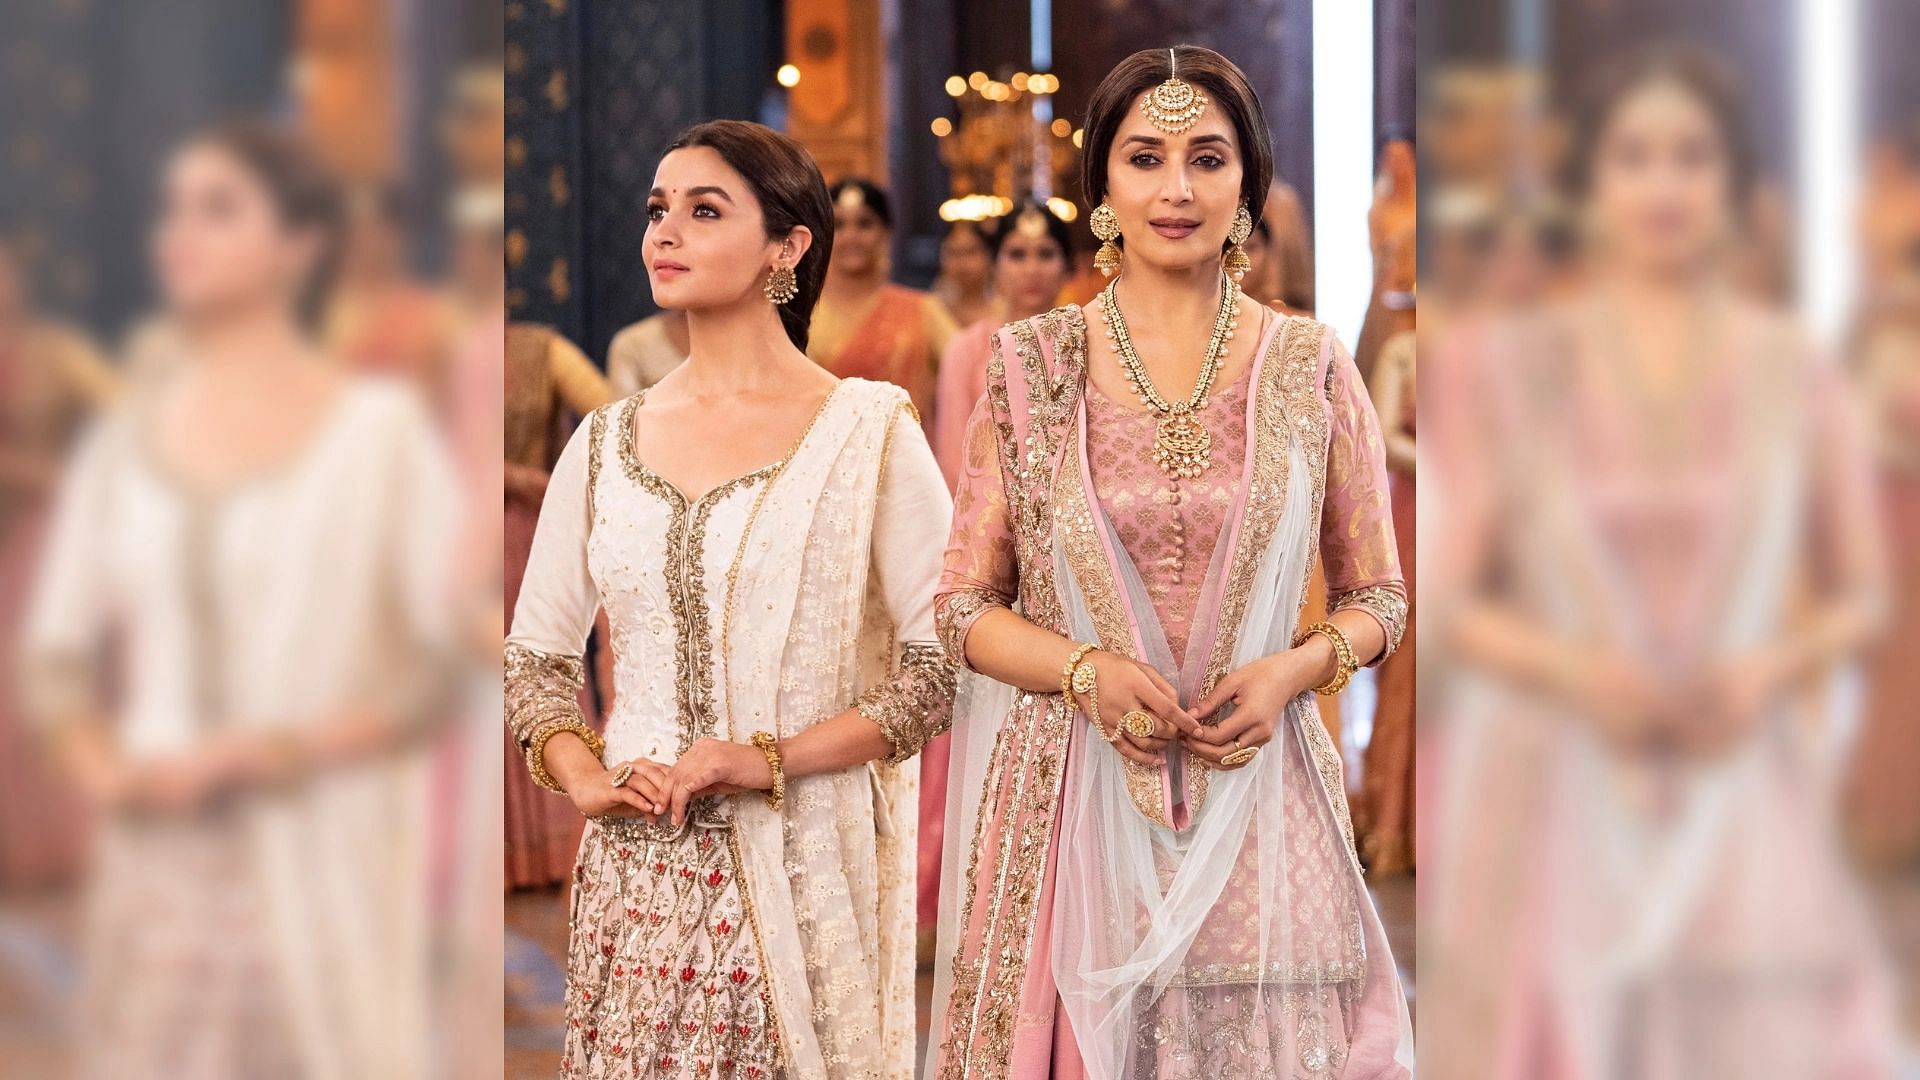 Alia Bhatt and Madhuri Dixit are a picture of elegance in ‘Ghar More Pardesiya’ from <i>Kalank</i>.